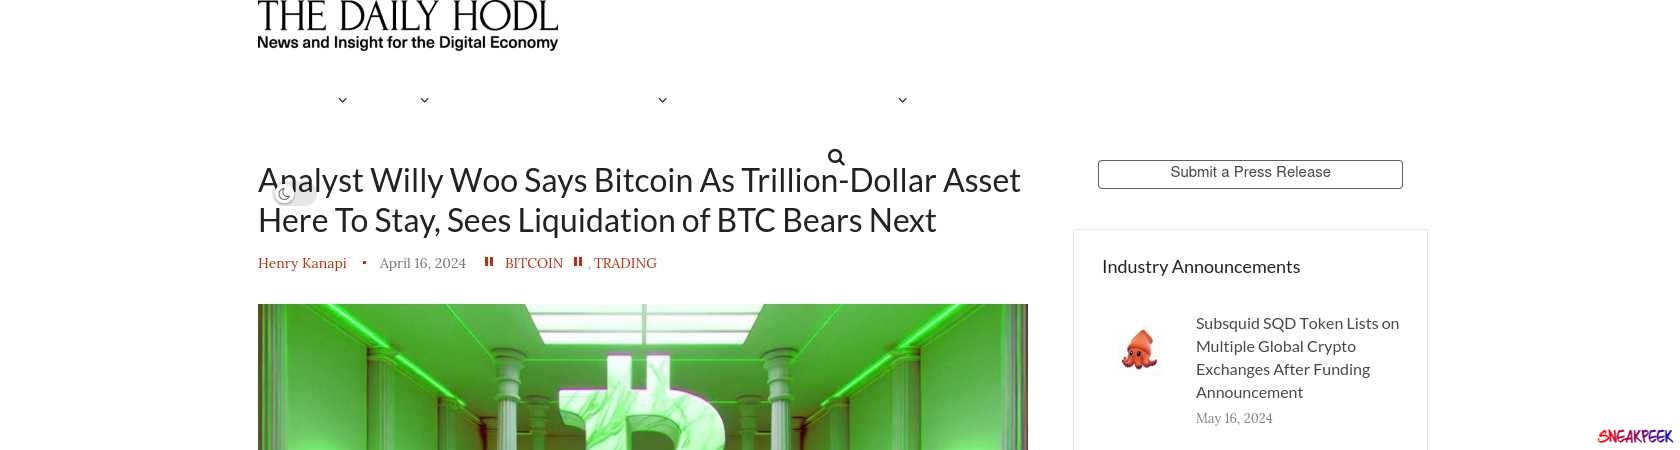 Read the full Article:  ⭲ Analyst Willy Woo Says Bitcoin As Trillion-Dollar Asset Here To Stay, Sees Liquidation of BTC Bears Next